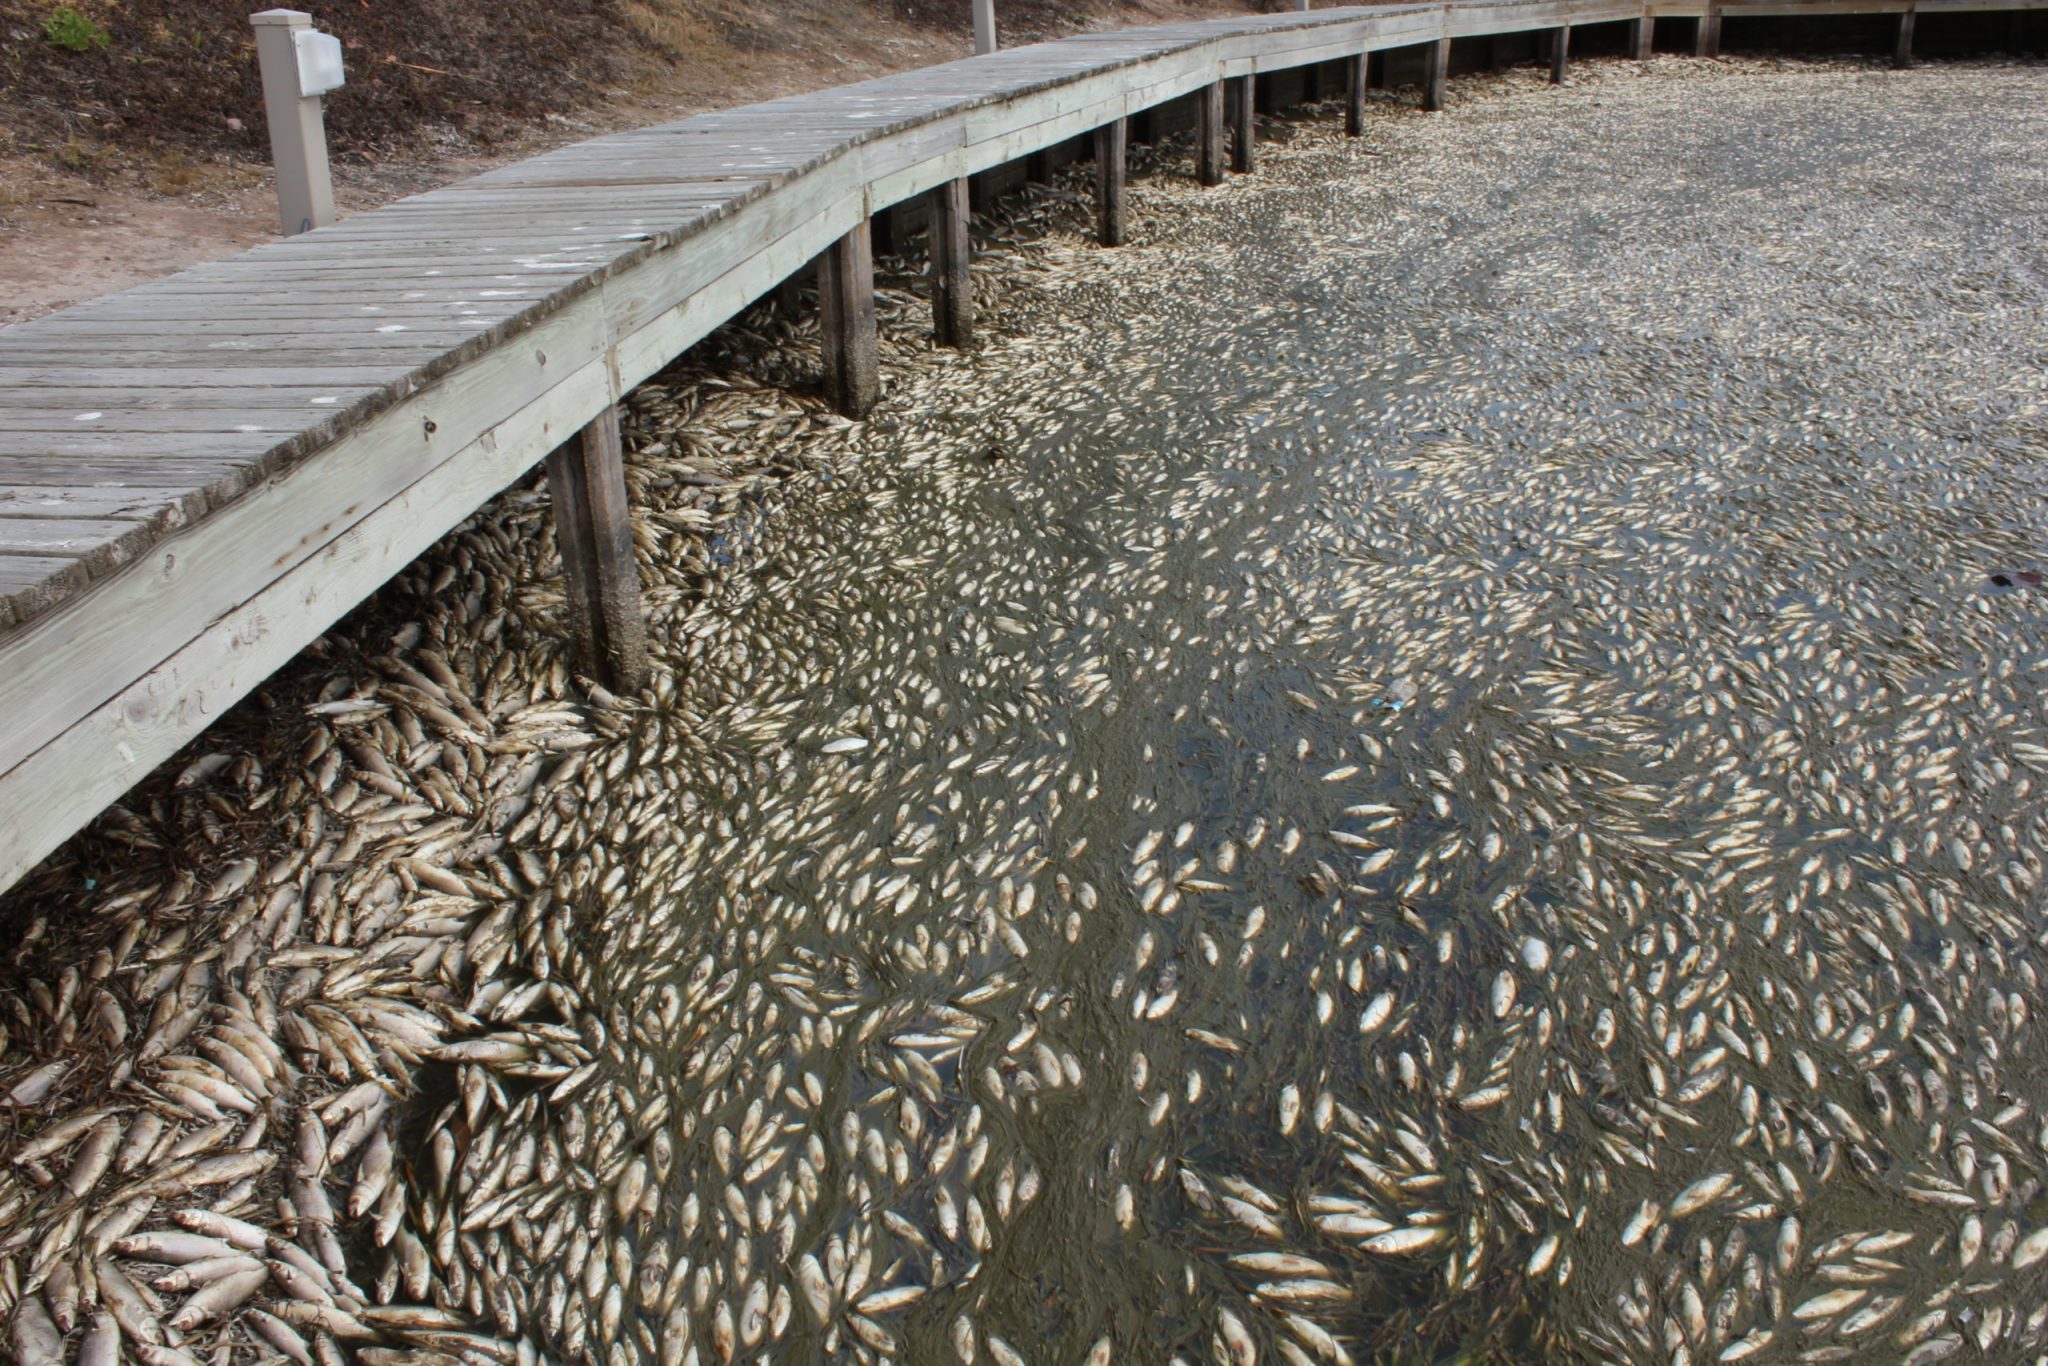 At least 3.8 million fish killed during Texas winter weather Strange